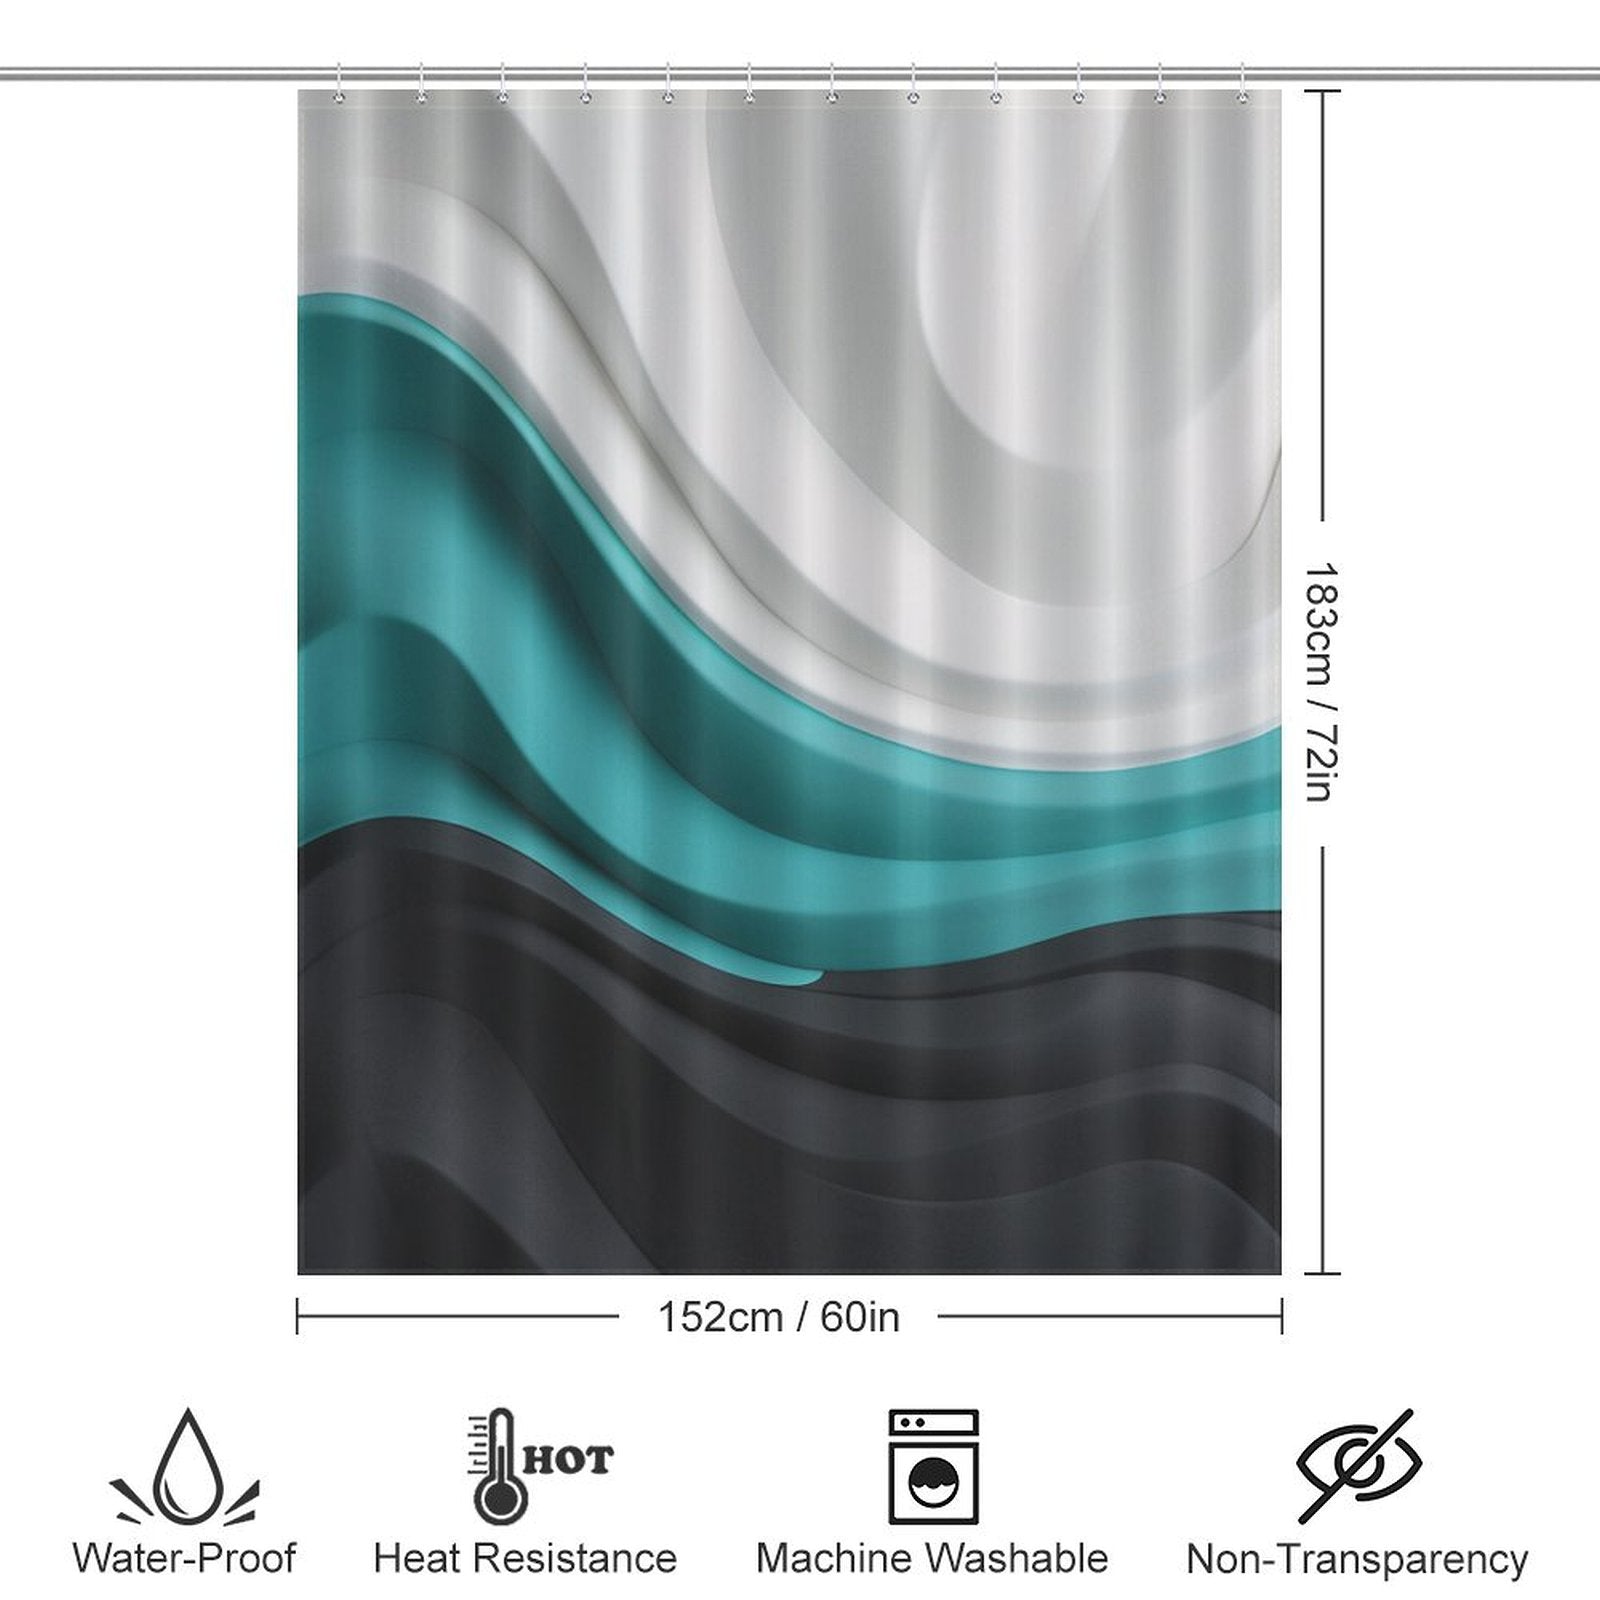 Chic Black White and Turquoise Shower Curtain